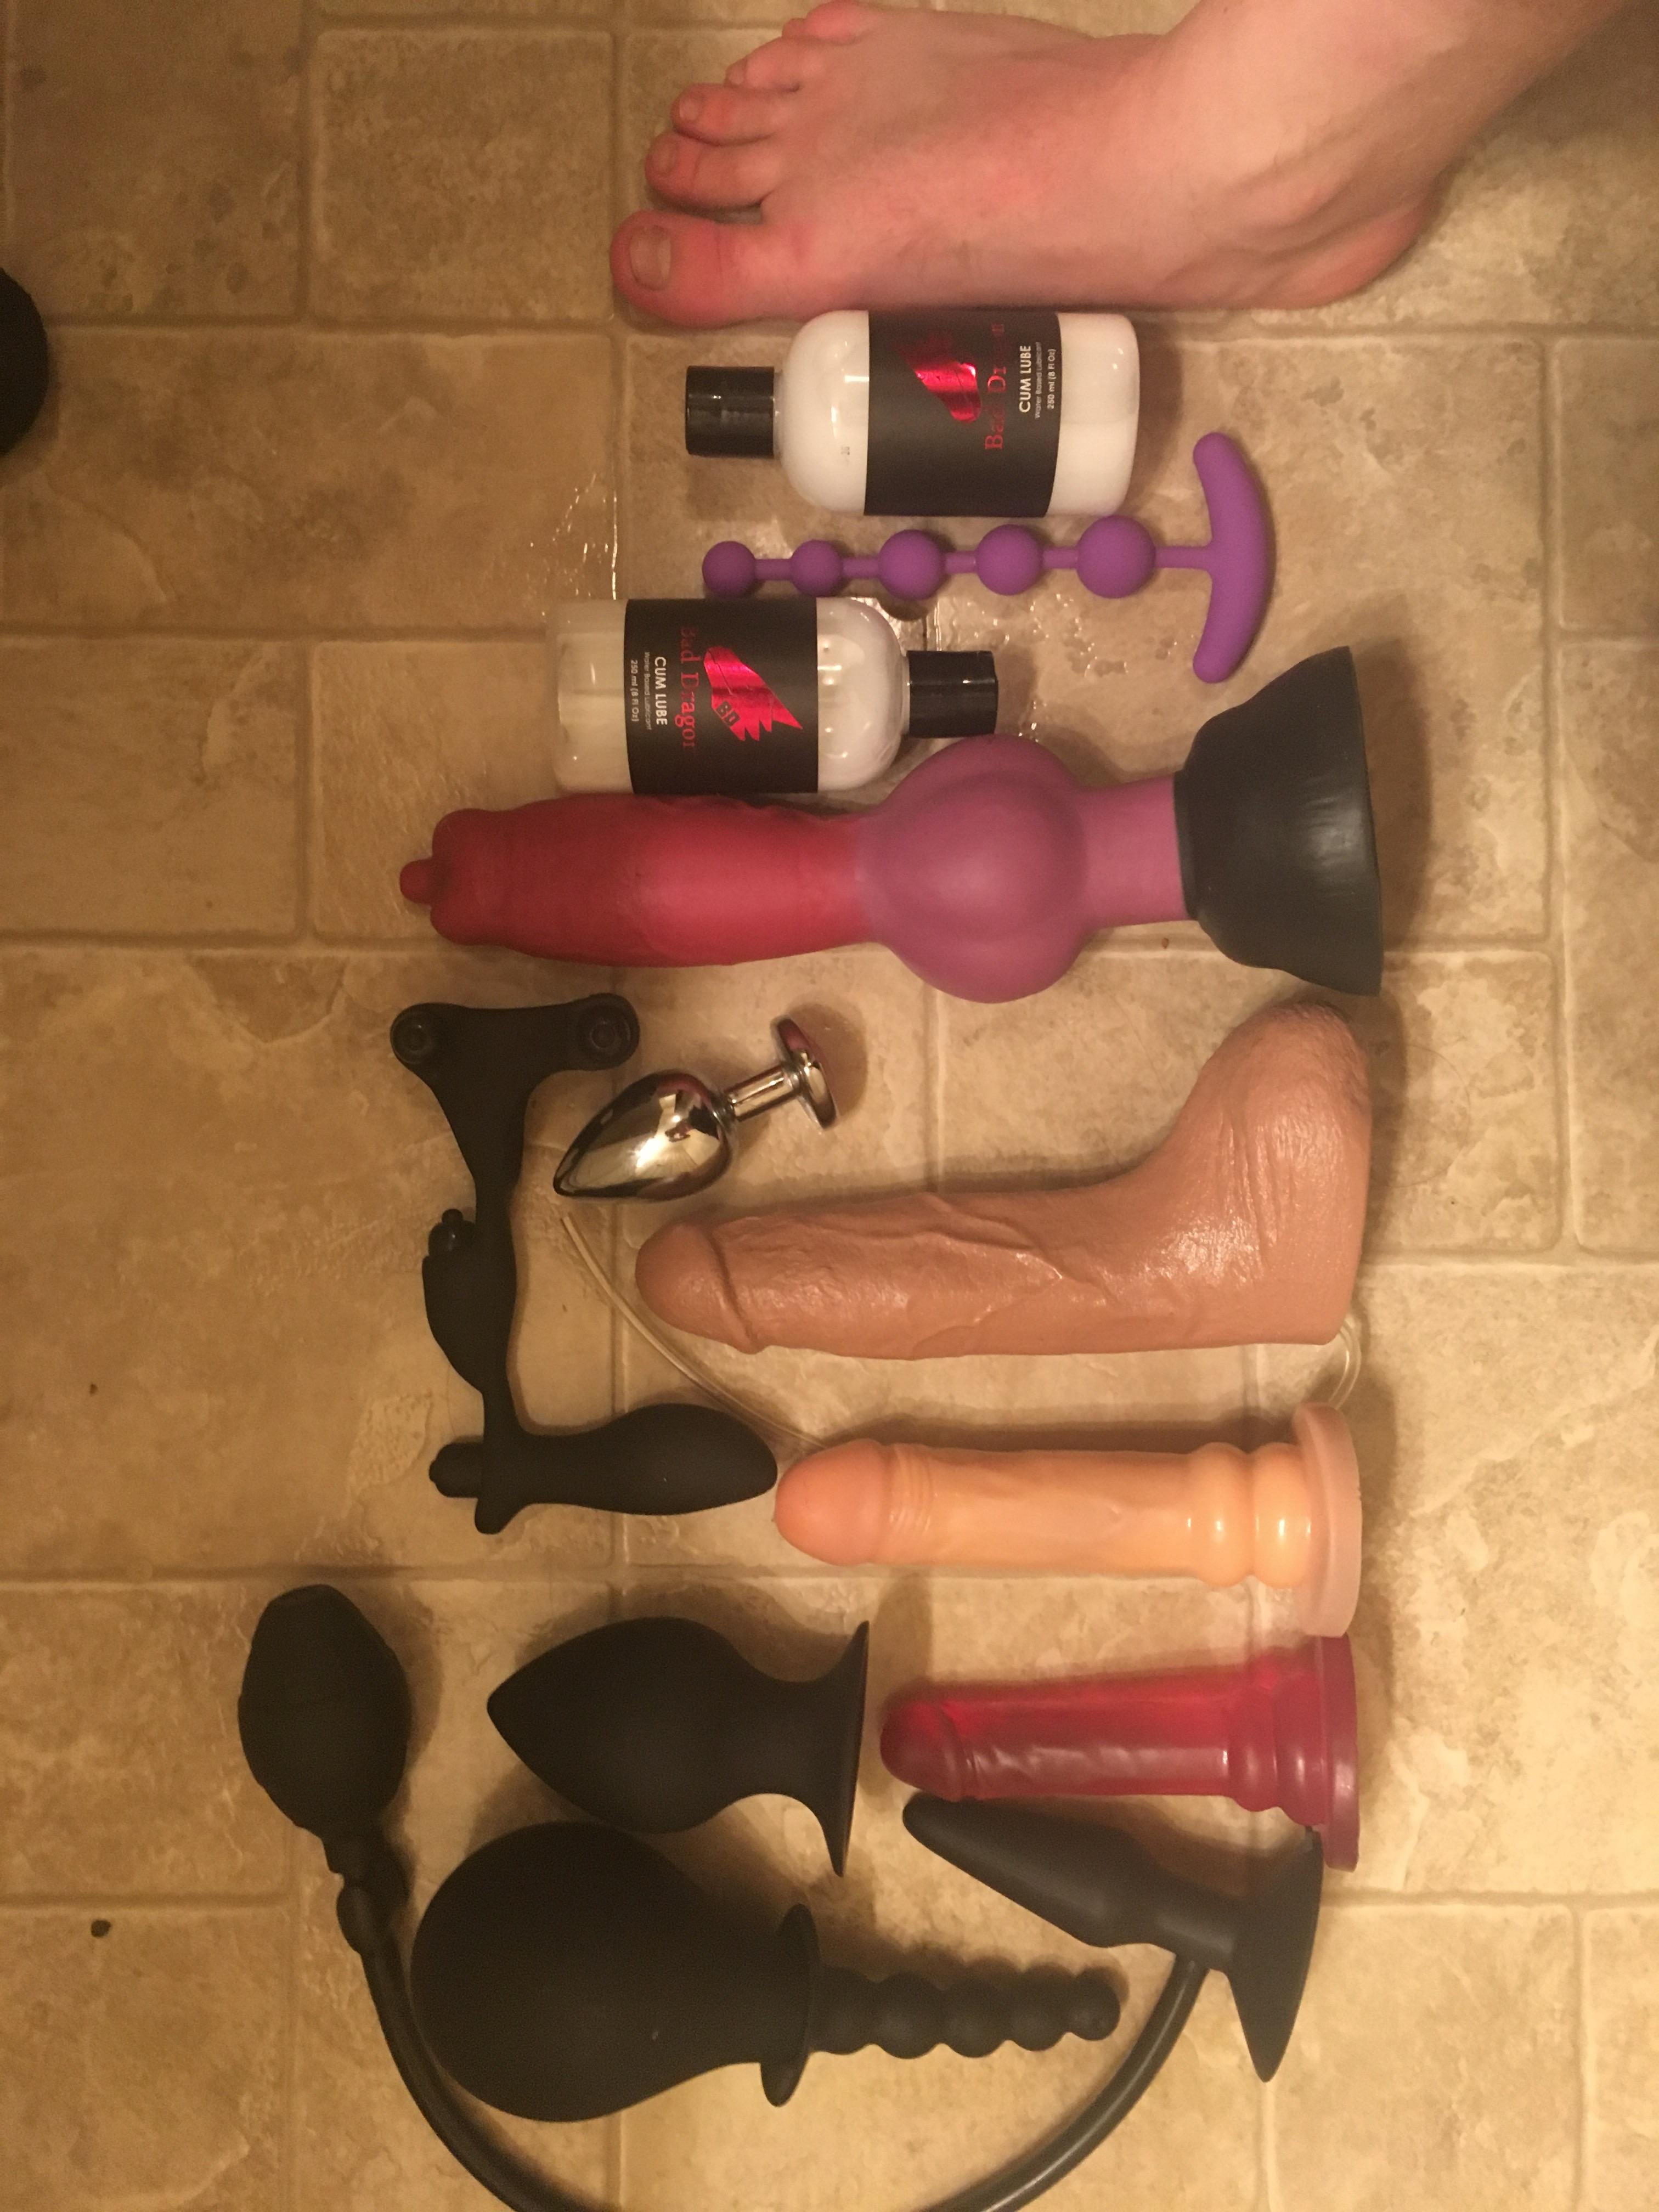 Decided to post all my penetrable toys! Foot for scale!